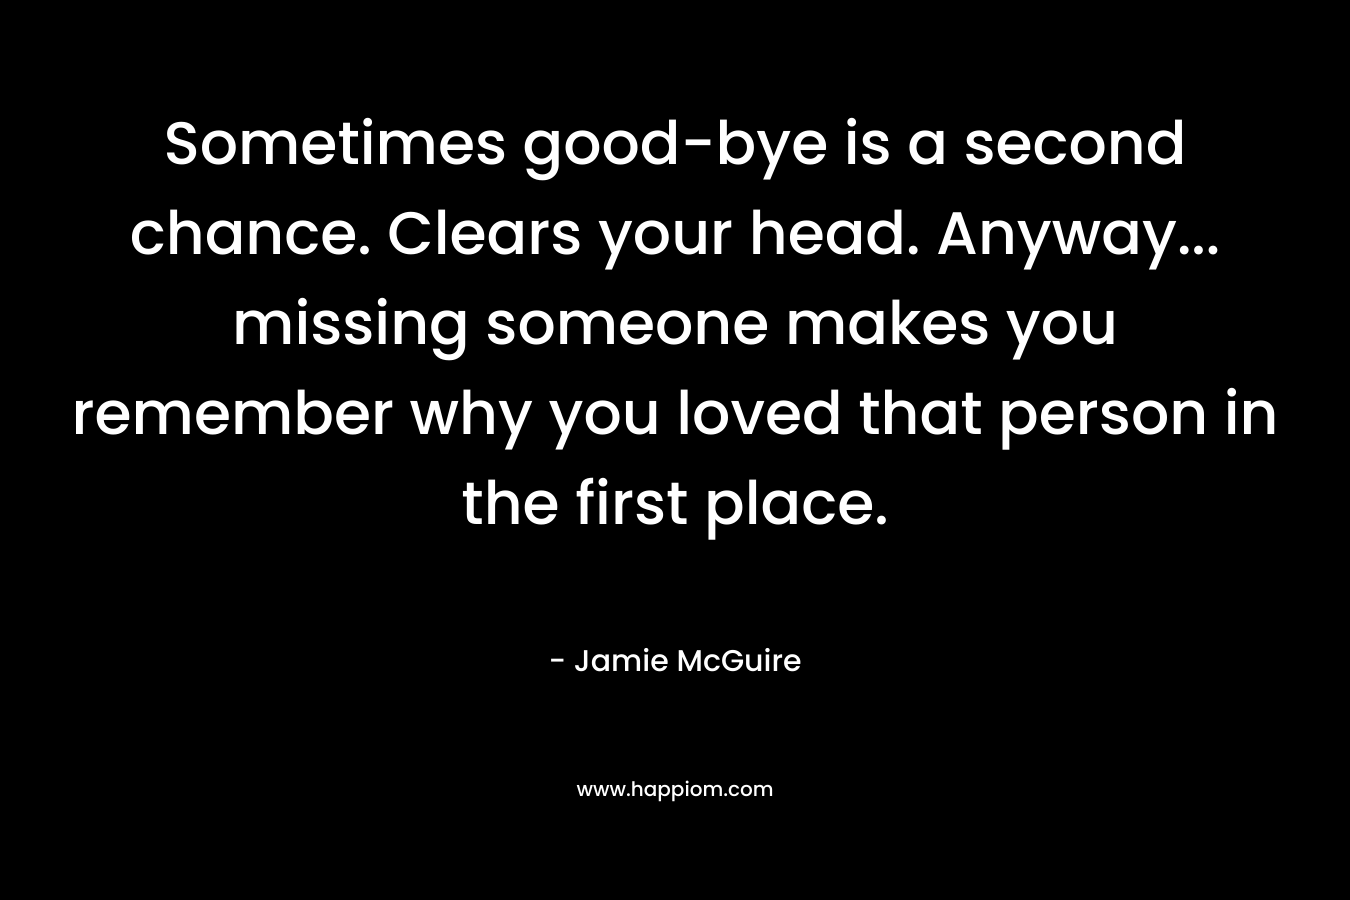 Sometimes good-bye is a second chance. Clears your head. Anyway… missing someone makes you remember why you loved that person in the first place. – Jamie McGuire